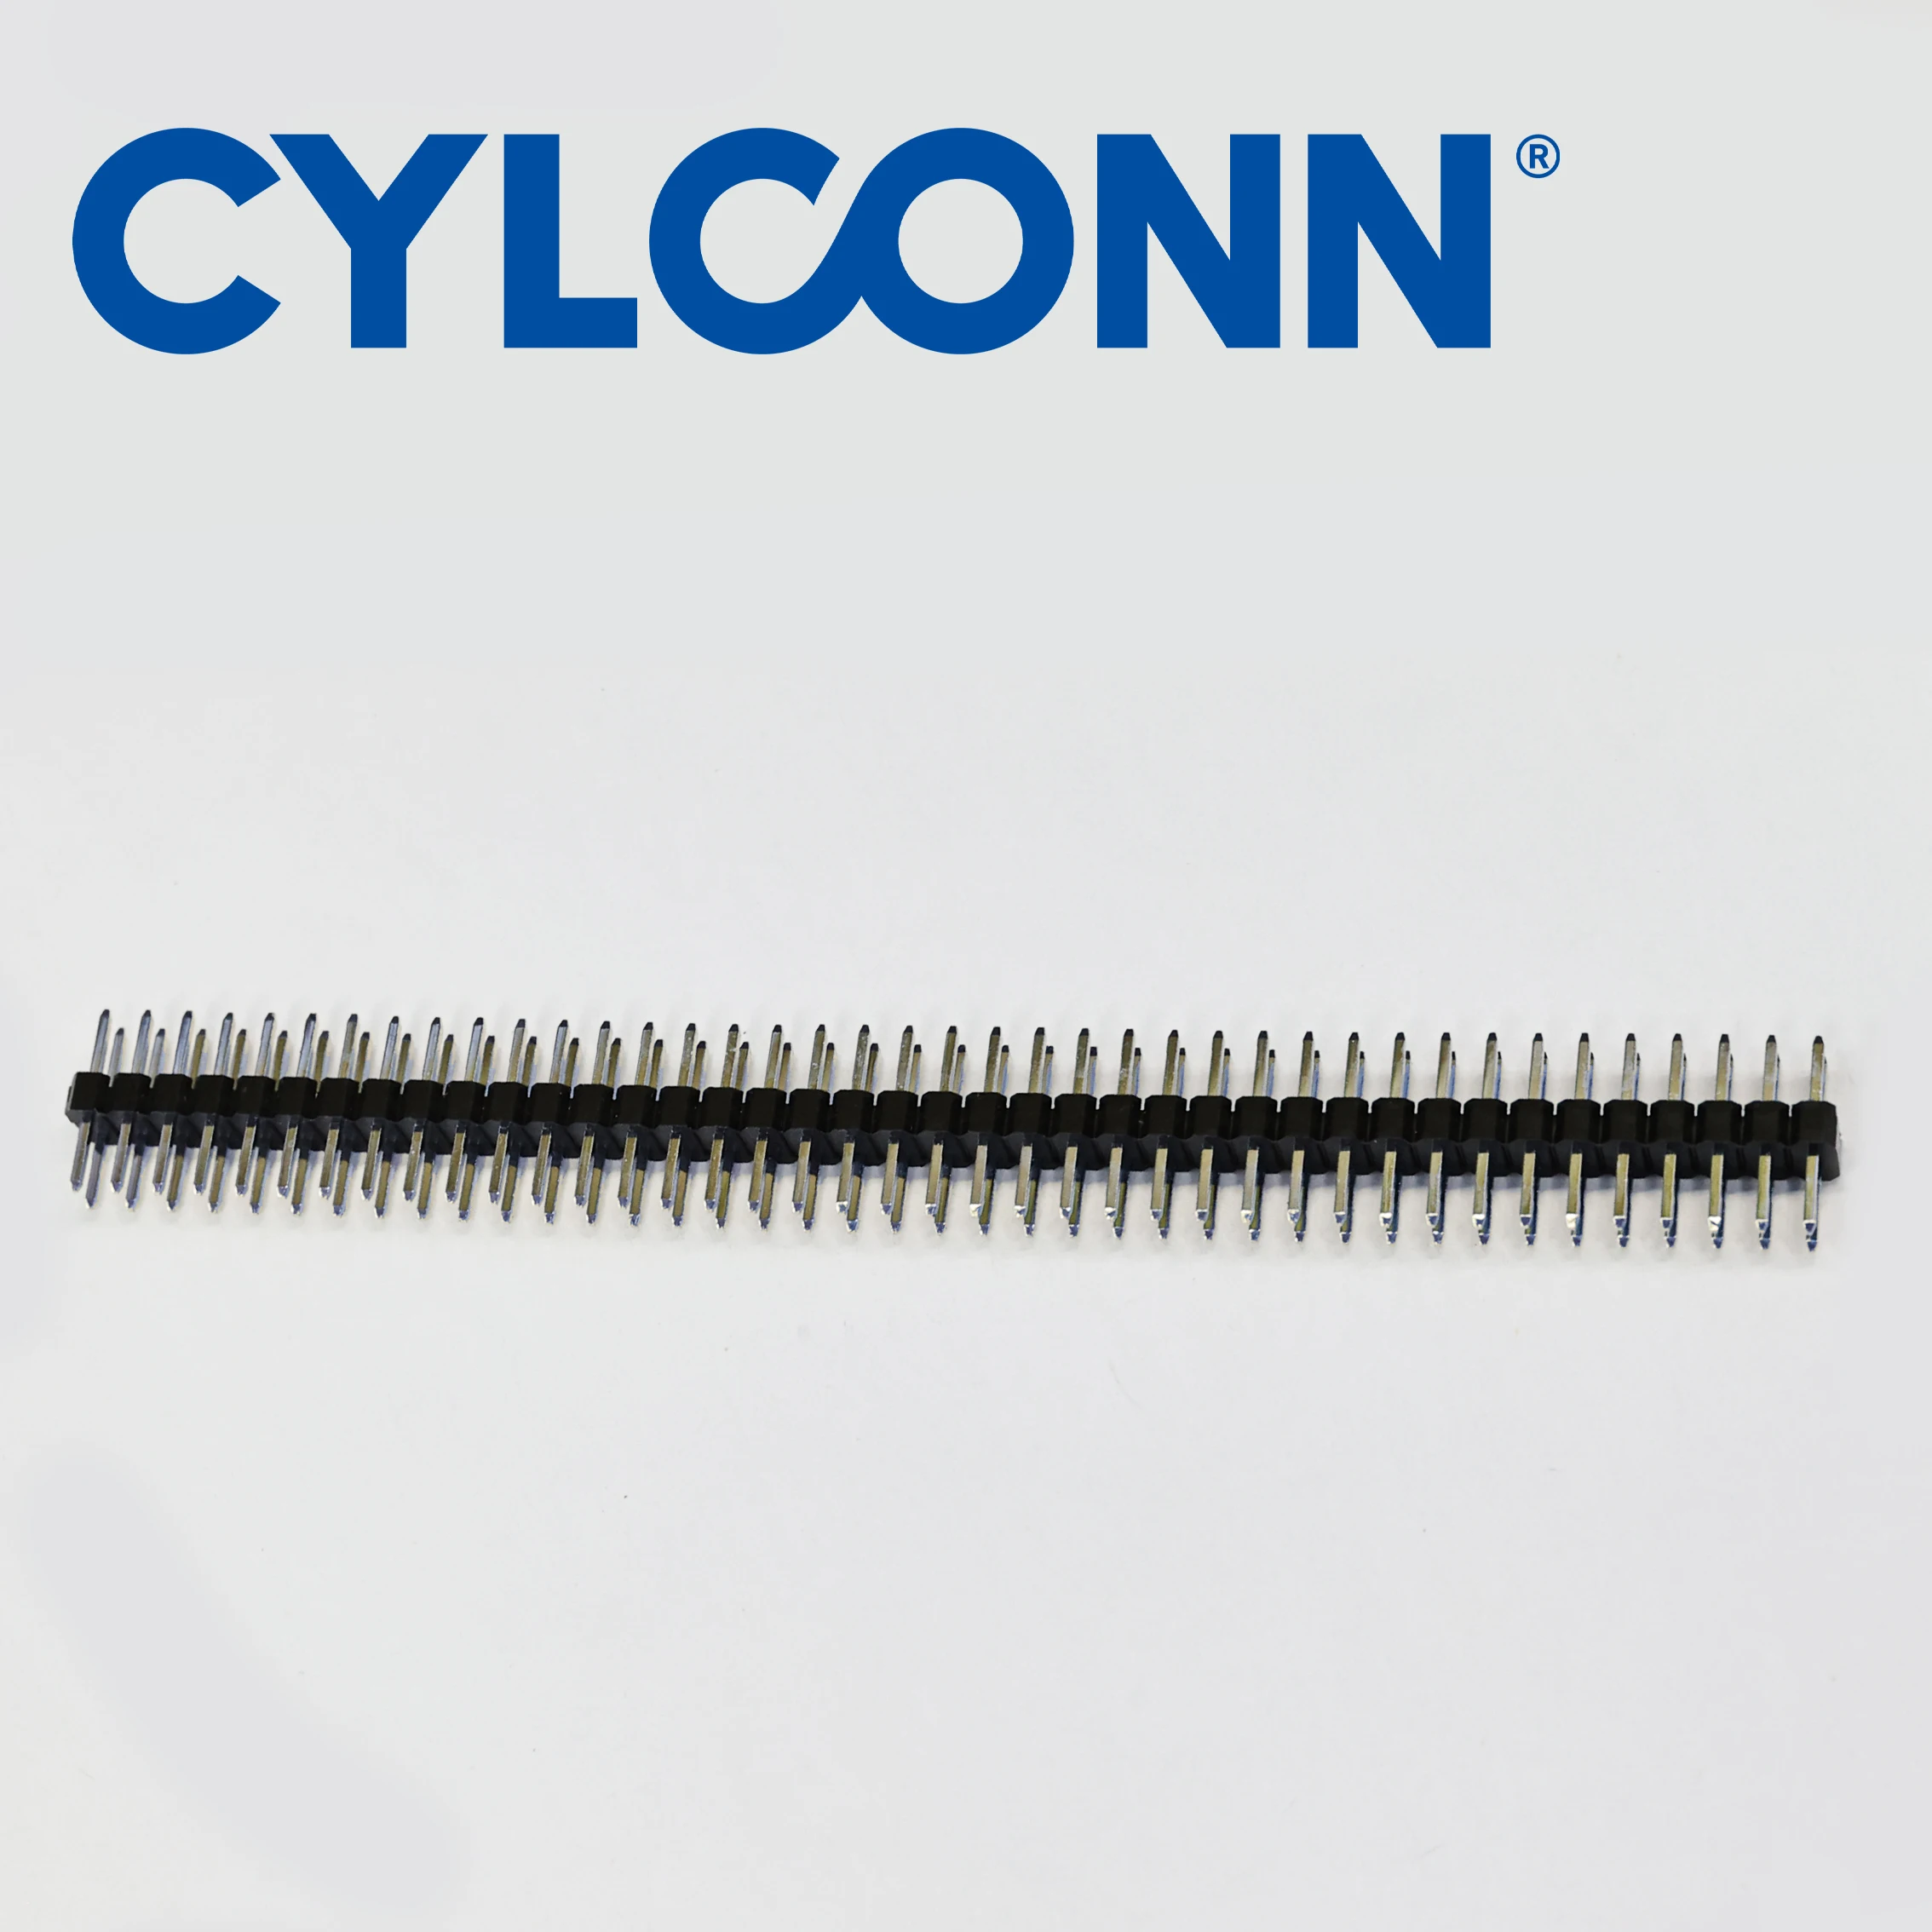 [CYLCONN] Manufacturers sell 2.0mm spacing double - row connector